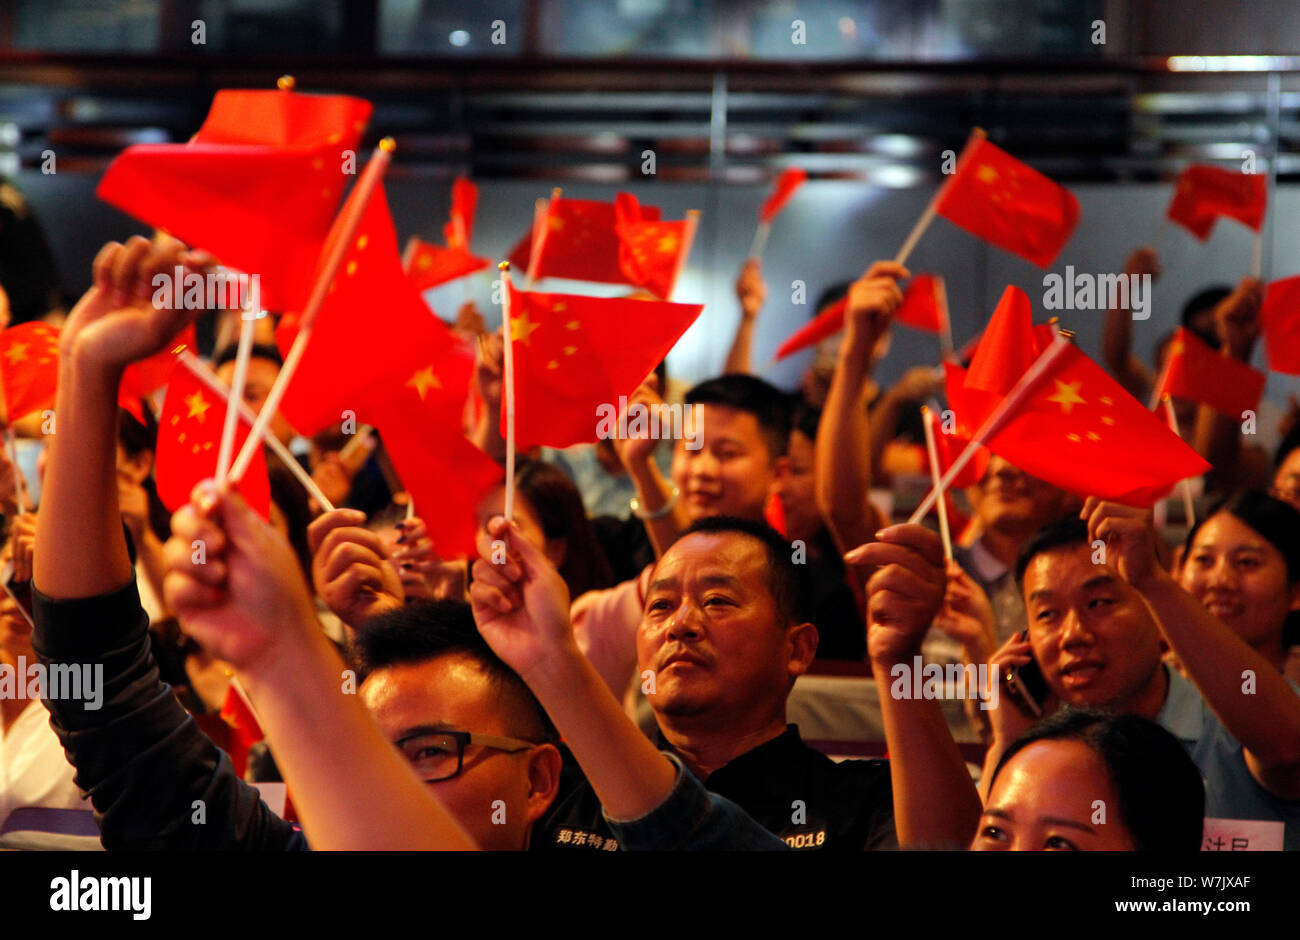 Local residents hold red flags during a celebration event ahead of the National Day in Zhengzhou city, central China's Henan province, 26 September 20 Stock Photo